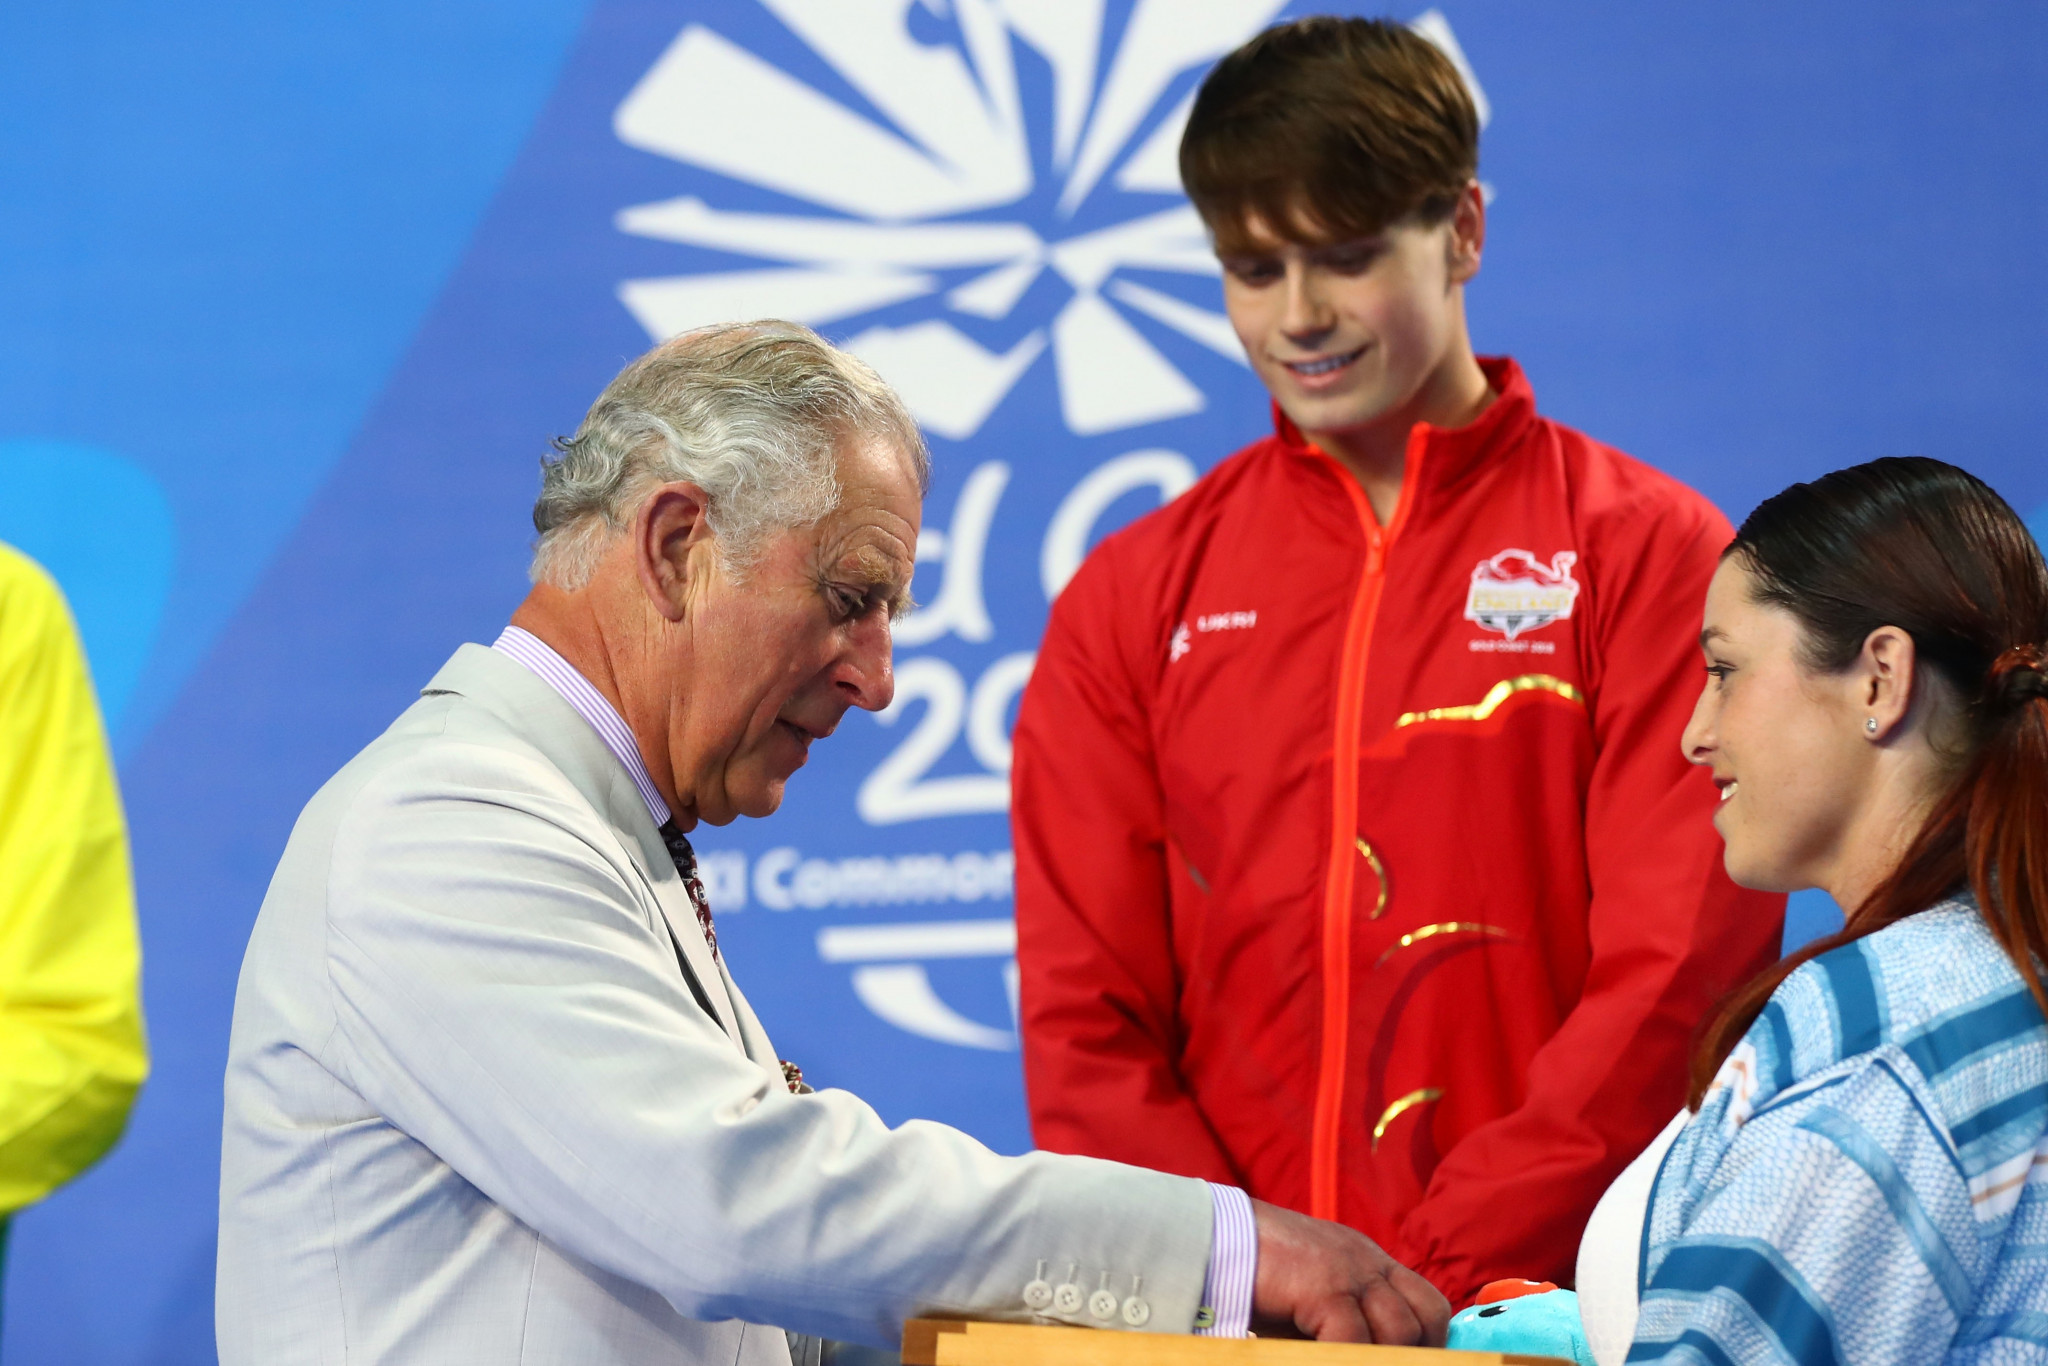 Prince Charles helped to present medals at the Optus Aquatic Centre ©Getty Images